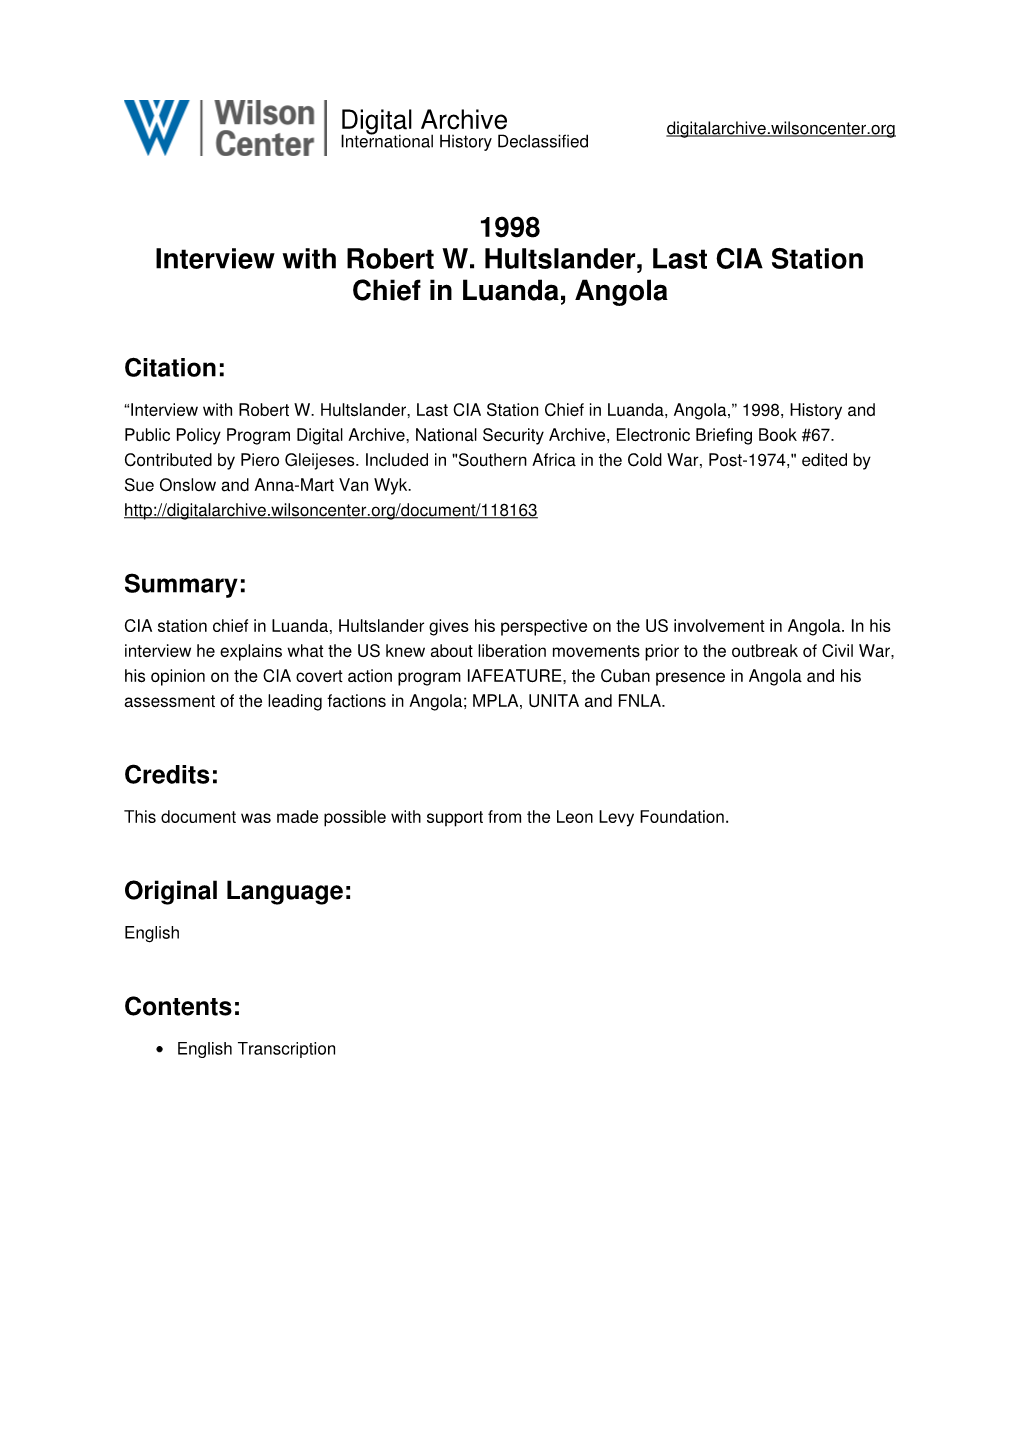 1998 Interview with Robert W. Hultslander, Last CIA Station Chief in Luanda, Angola